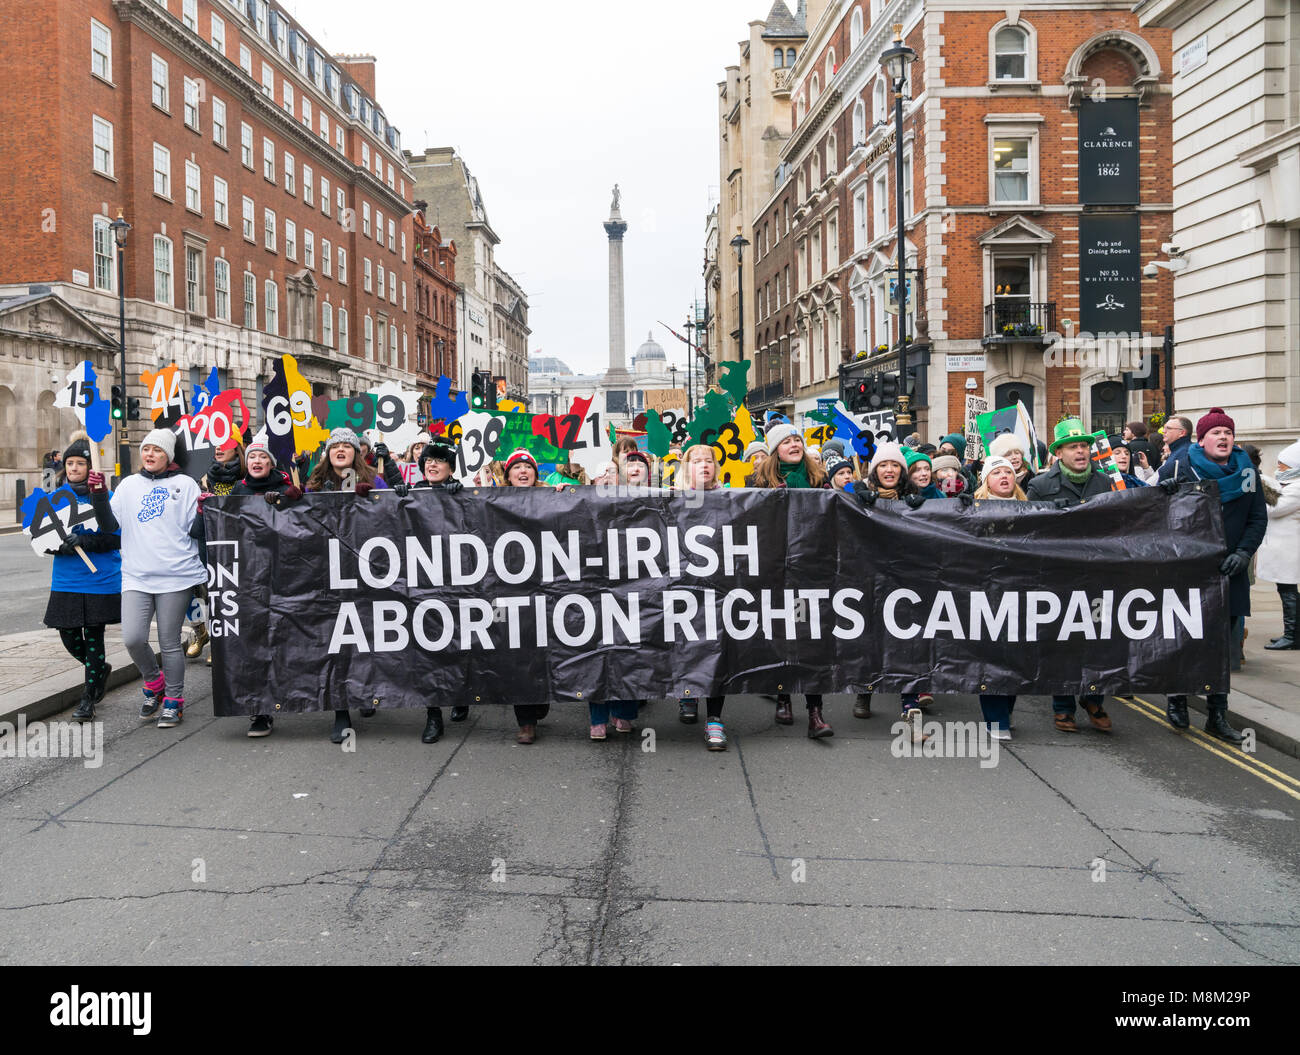 London, UK. 18 March 2018. Women marching with a big black banner 'London - Irish Abortion Rights Campaign', St Patrick's parade in London. Credit: AndKa/Alamy Live News Stock Photo